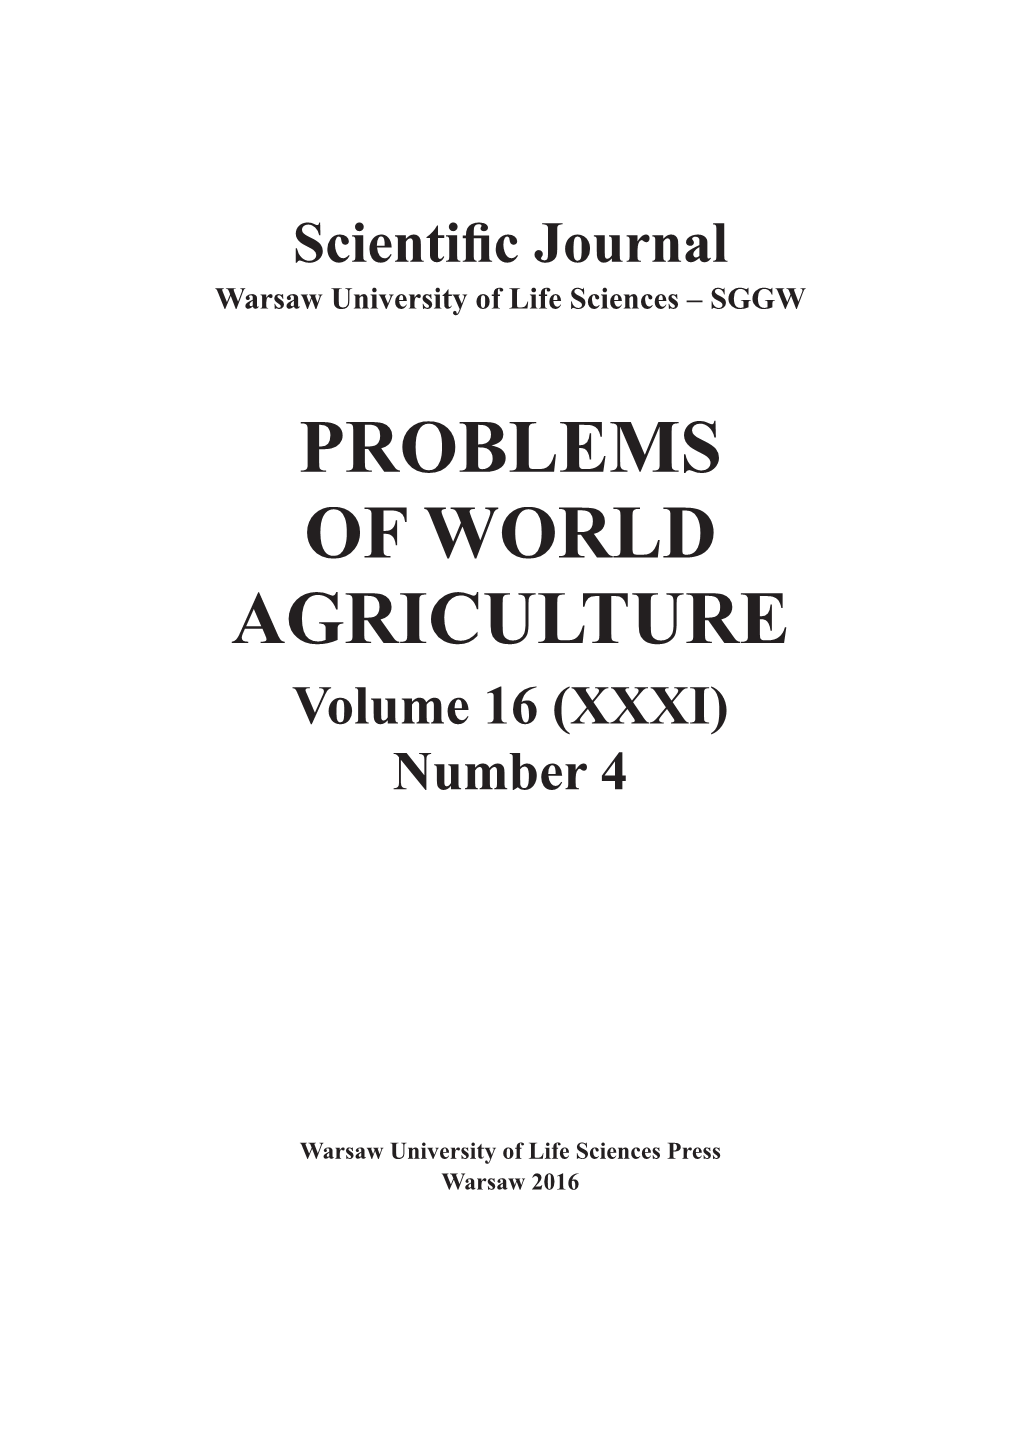 PROBLEMS of WORLD AGRICULTURE Volume 16 (XXXI) Number 4